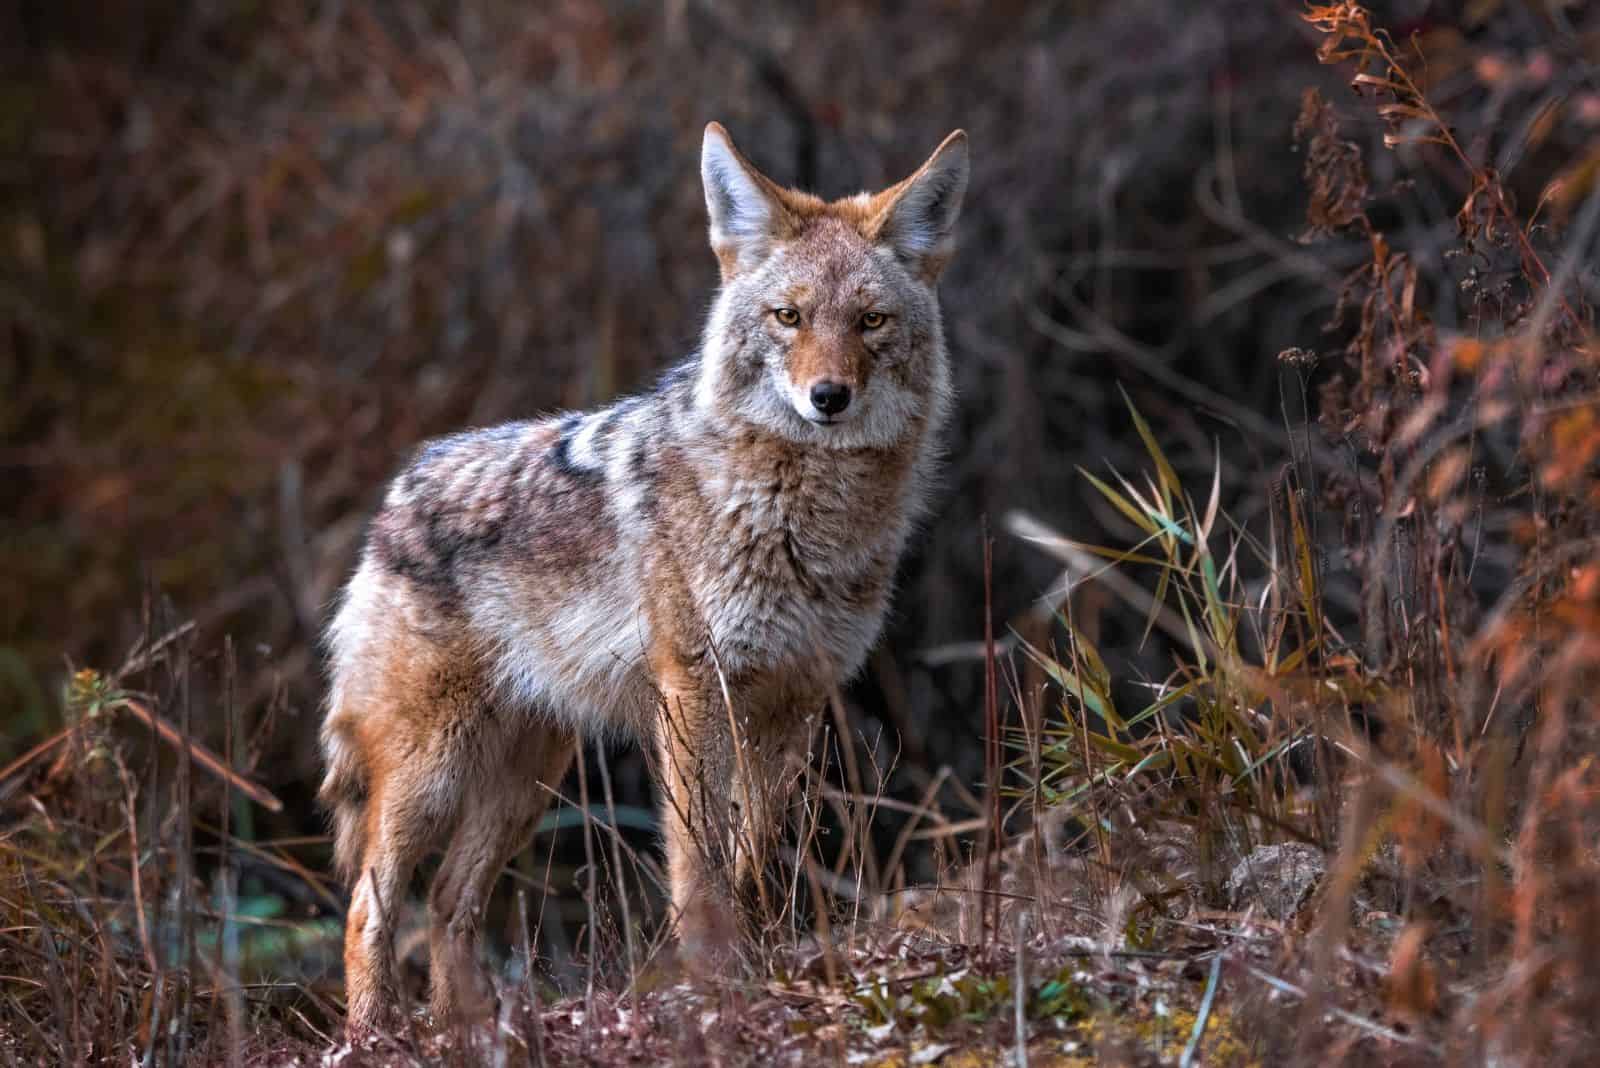 Wild Coyote stands in nature